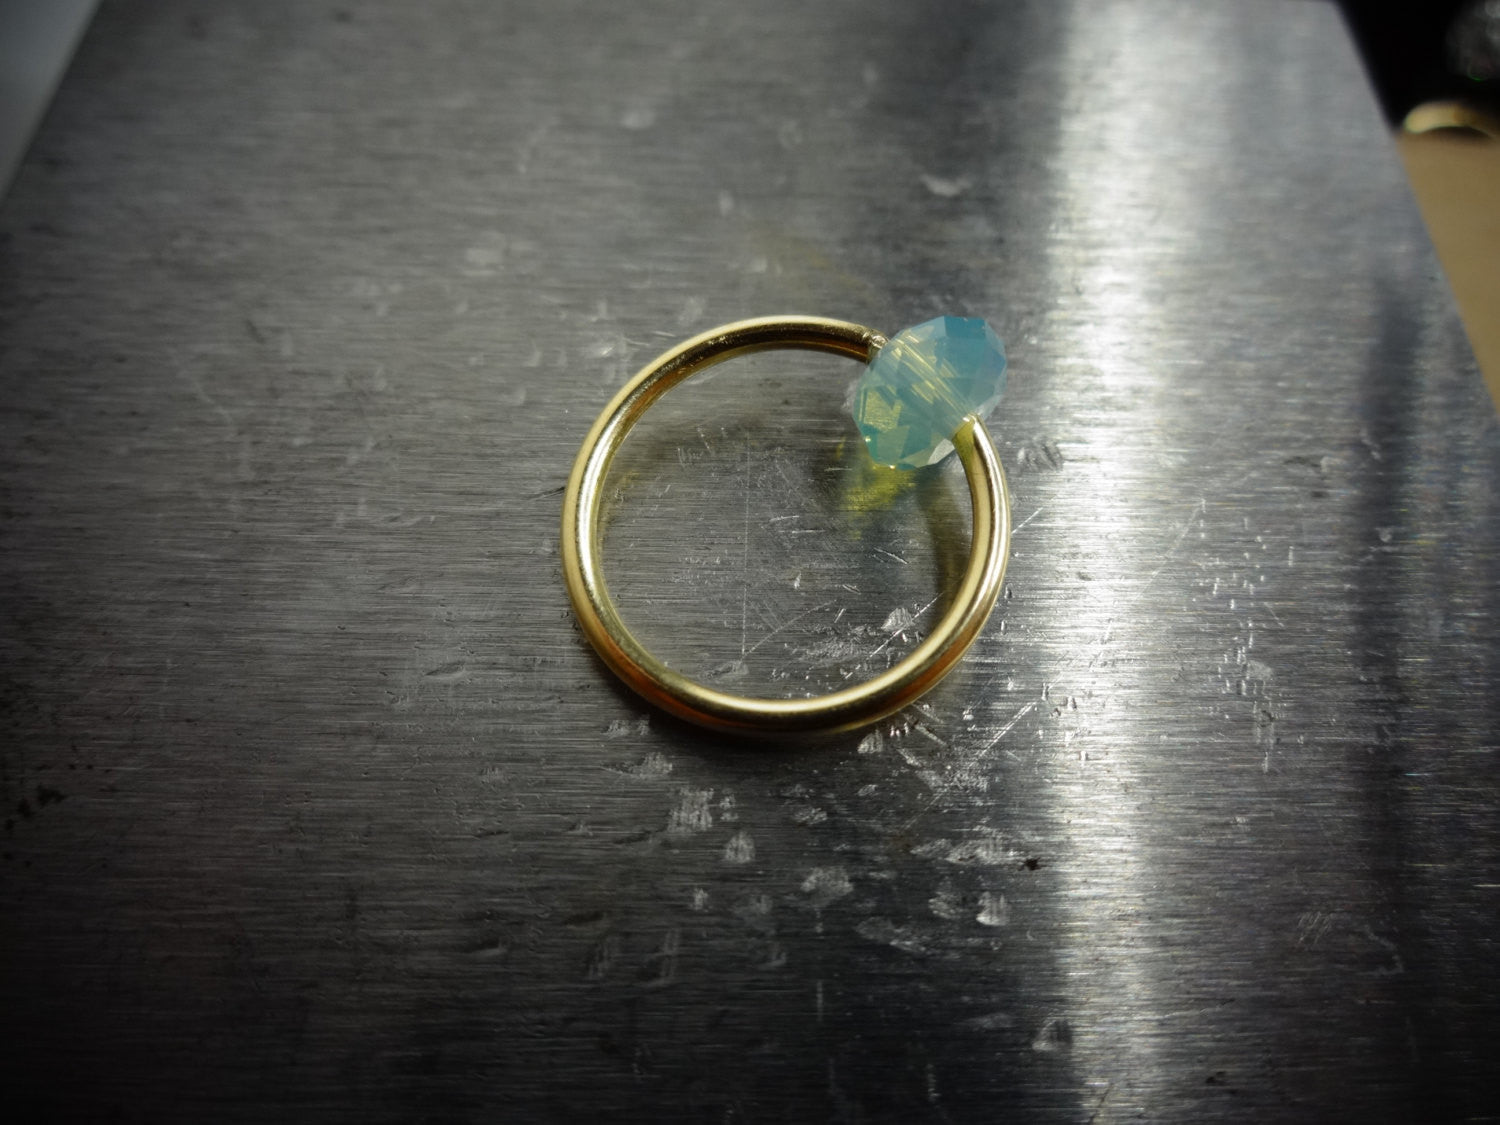 Captive Bead Ring made with OPAL BLUE Swarovski Crystal - 16 ga Hoop - 14k Gold (Y, W, or R), Sterling Silver, or Platinum